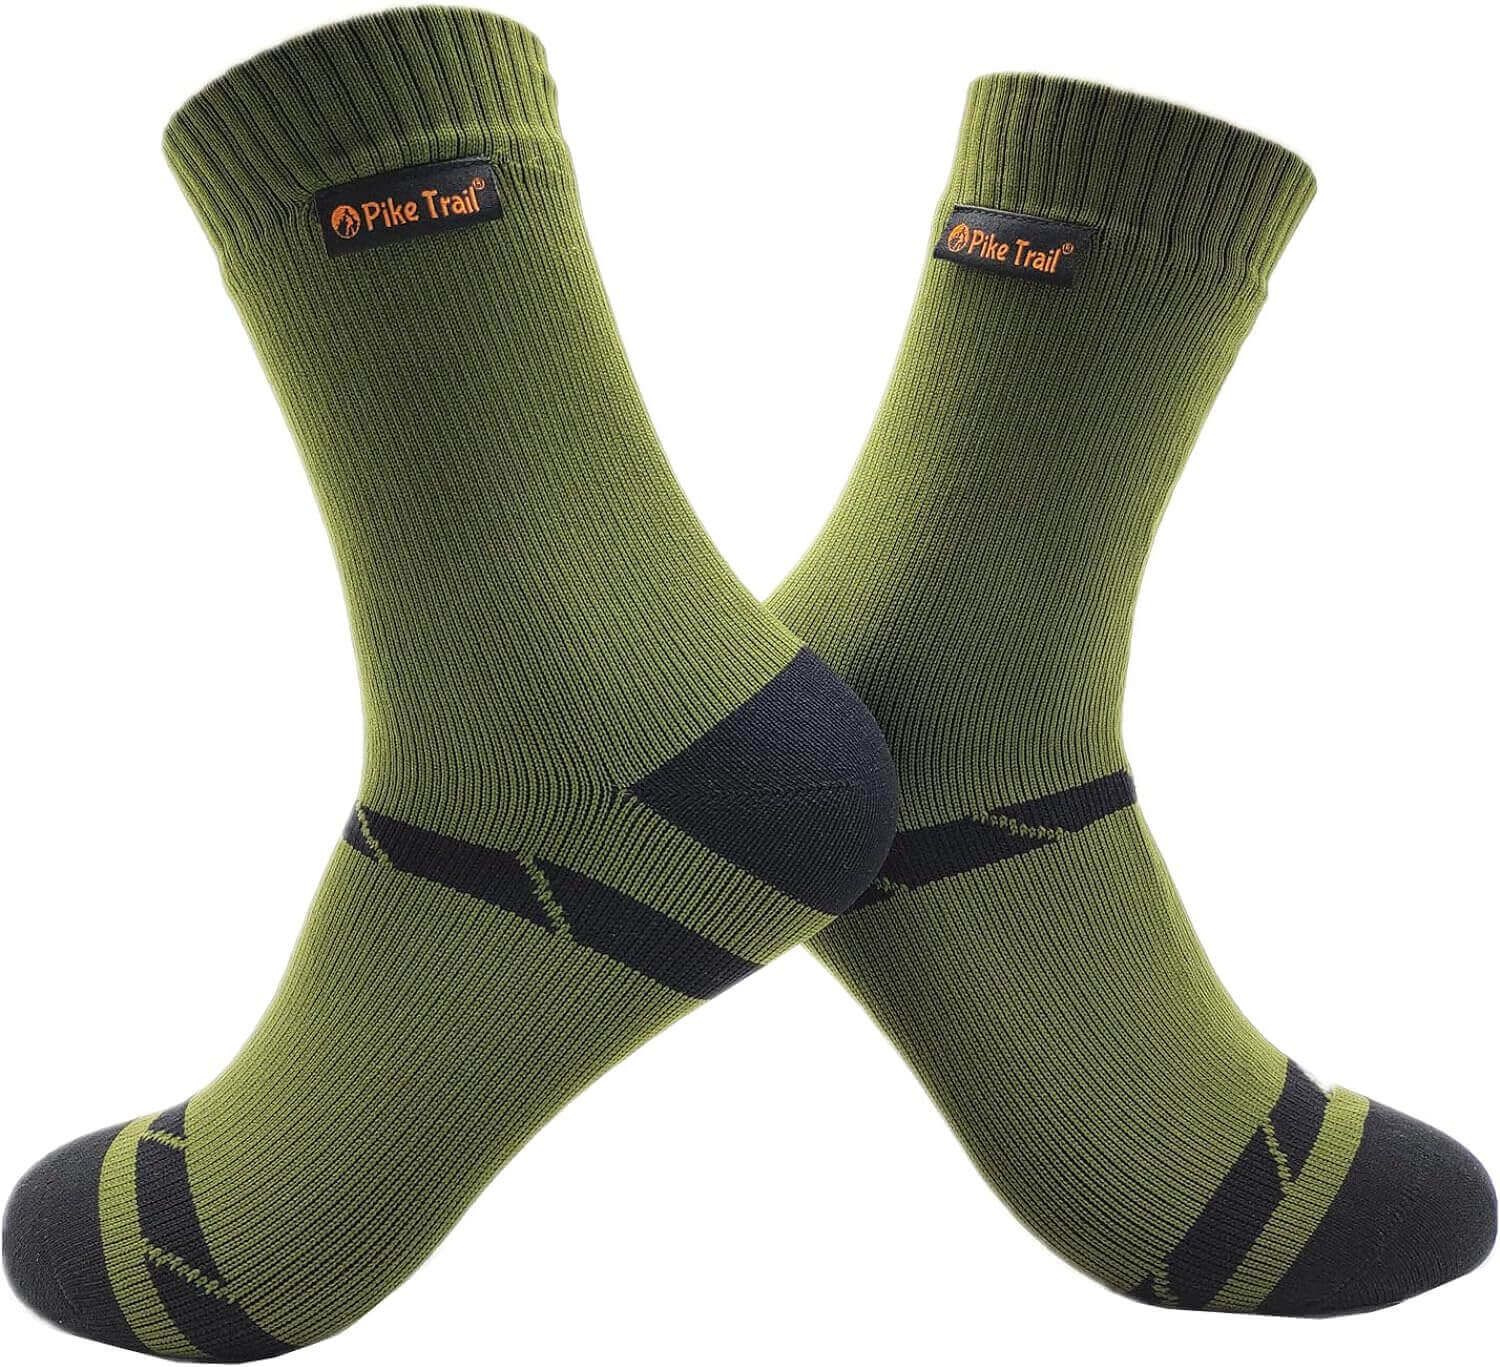 Shop The Latest >100% Waterproof Breathable Socks for Hiking & Trekking > *Only $25.64*> From The Top Brand > *Pike Traill* > Shop Now and Get Free Shipping On Orders Over $45.00 >*Shop Earth Foot*